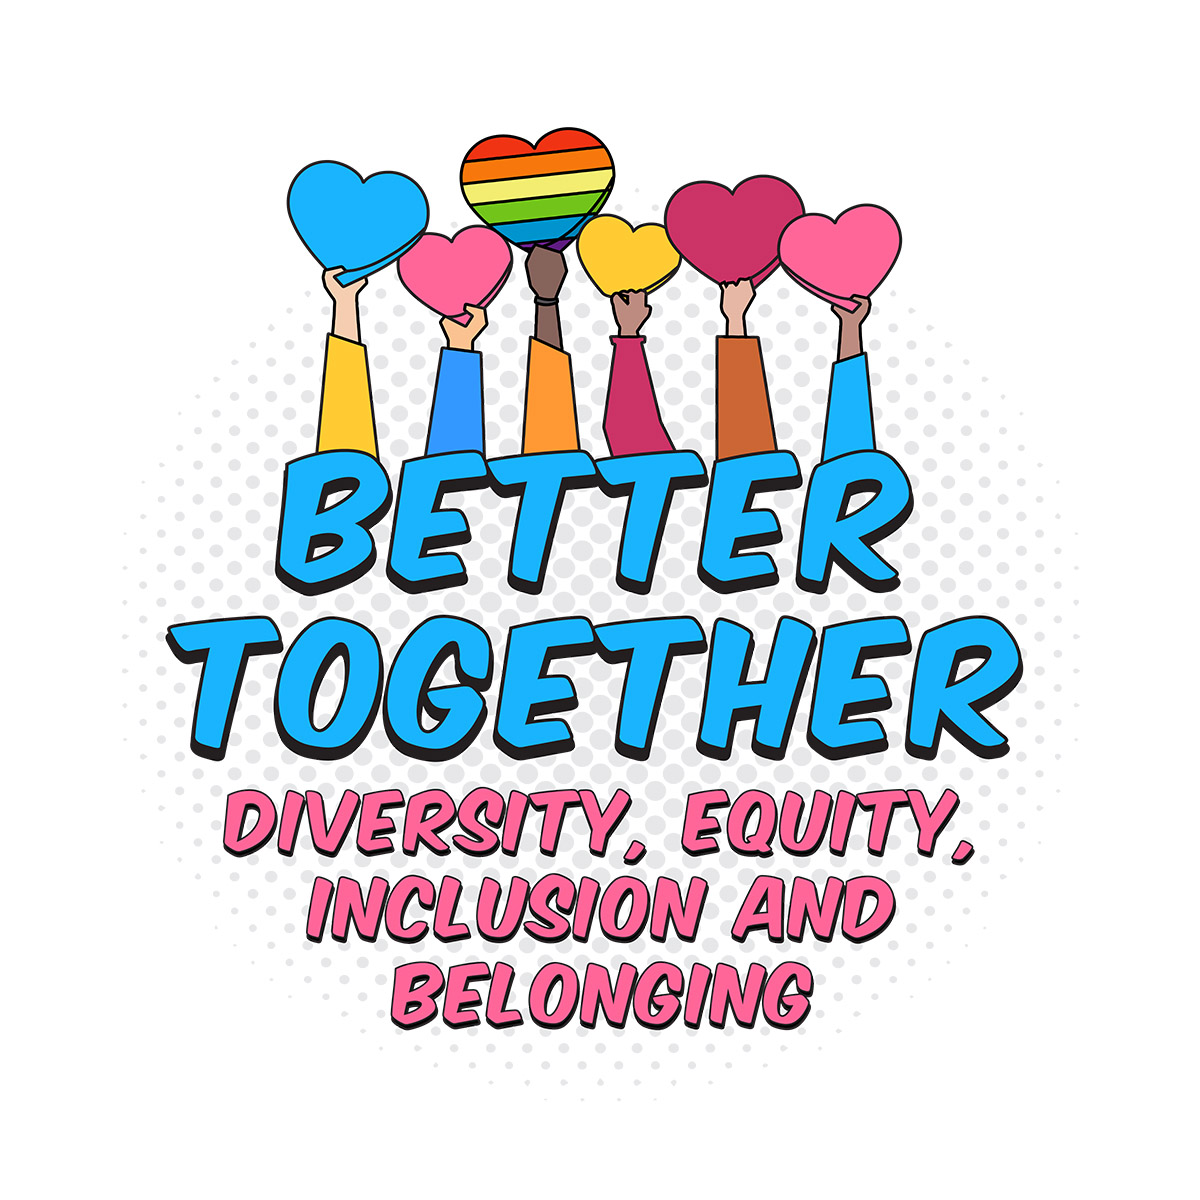 Better Together: Diversity, Equity, Inclusion and Belonging